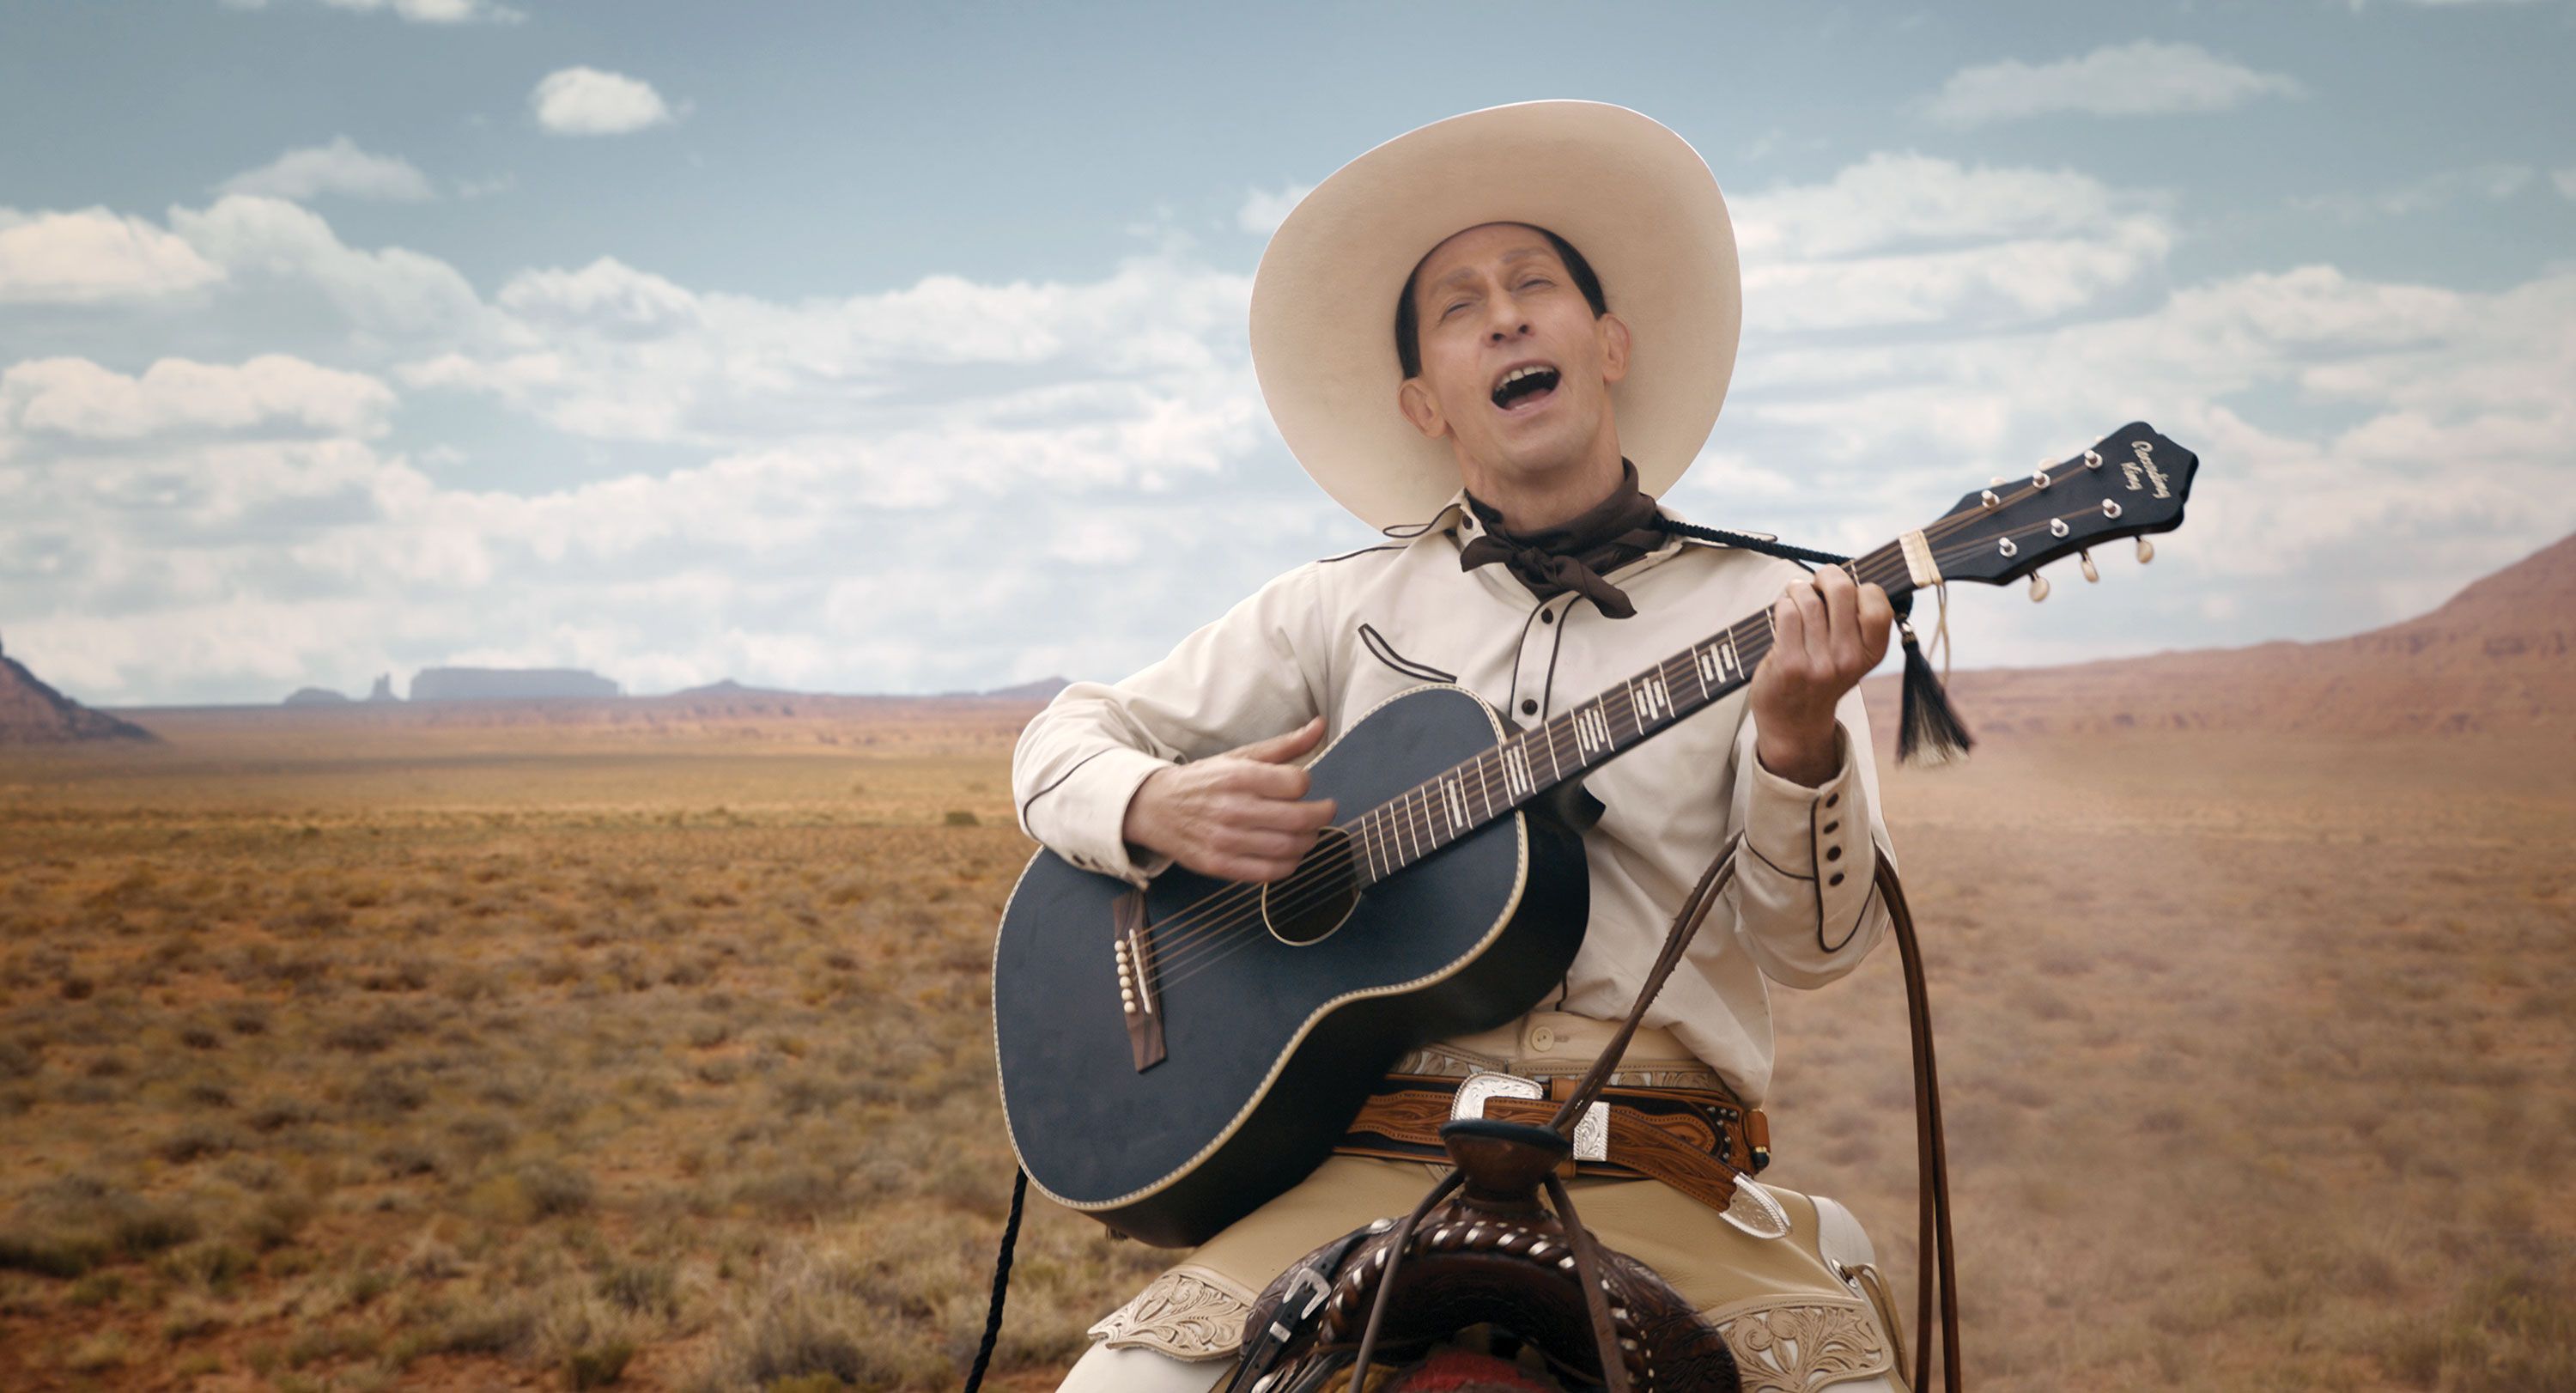 The Ballad of Buster Scruggs' Trailer: Still Not a Series - The